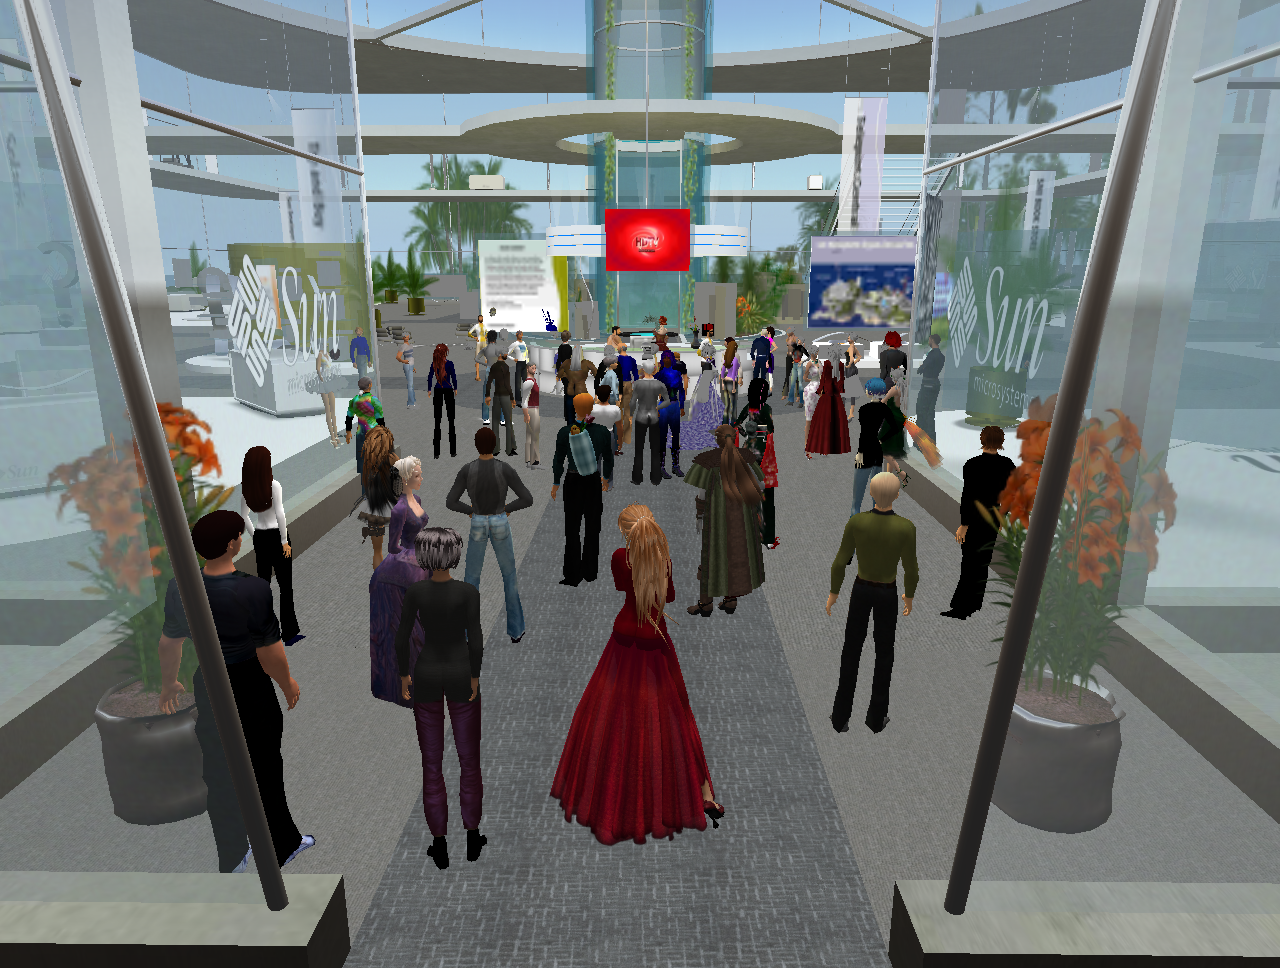 Event Showcase in Second Life. Image by Nicola Marae Allain.